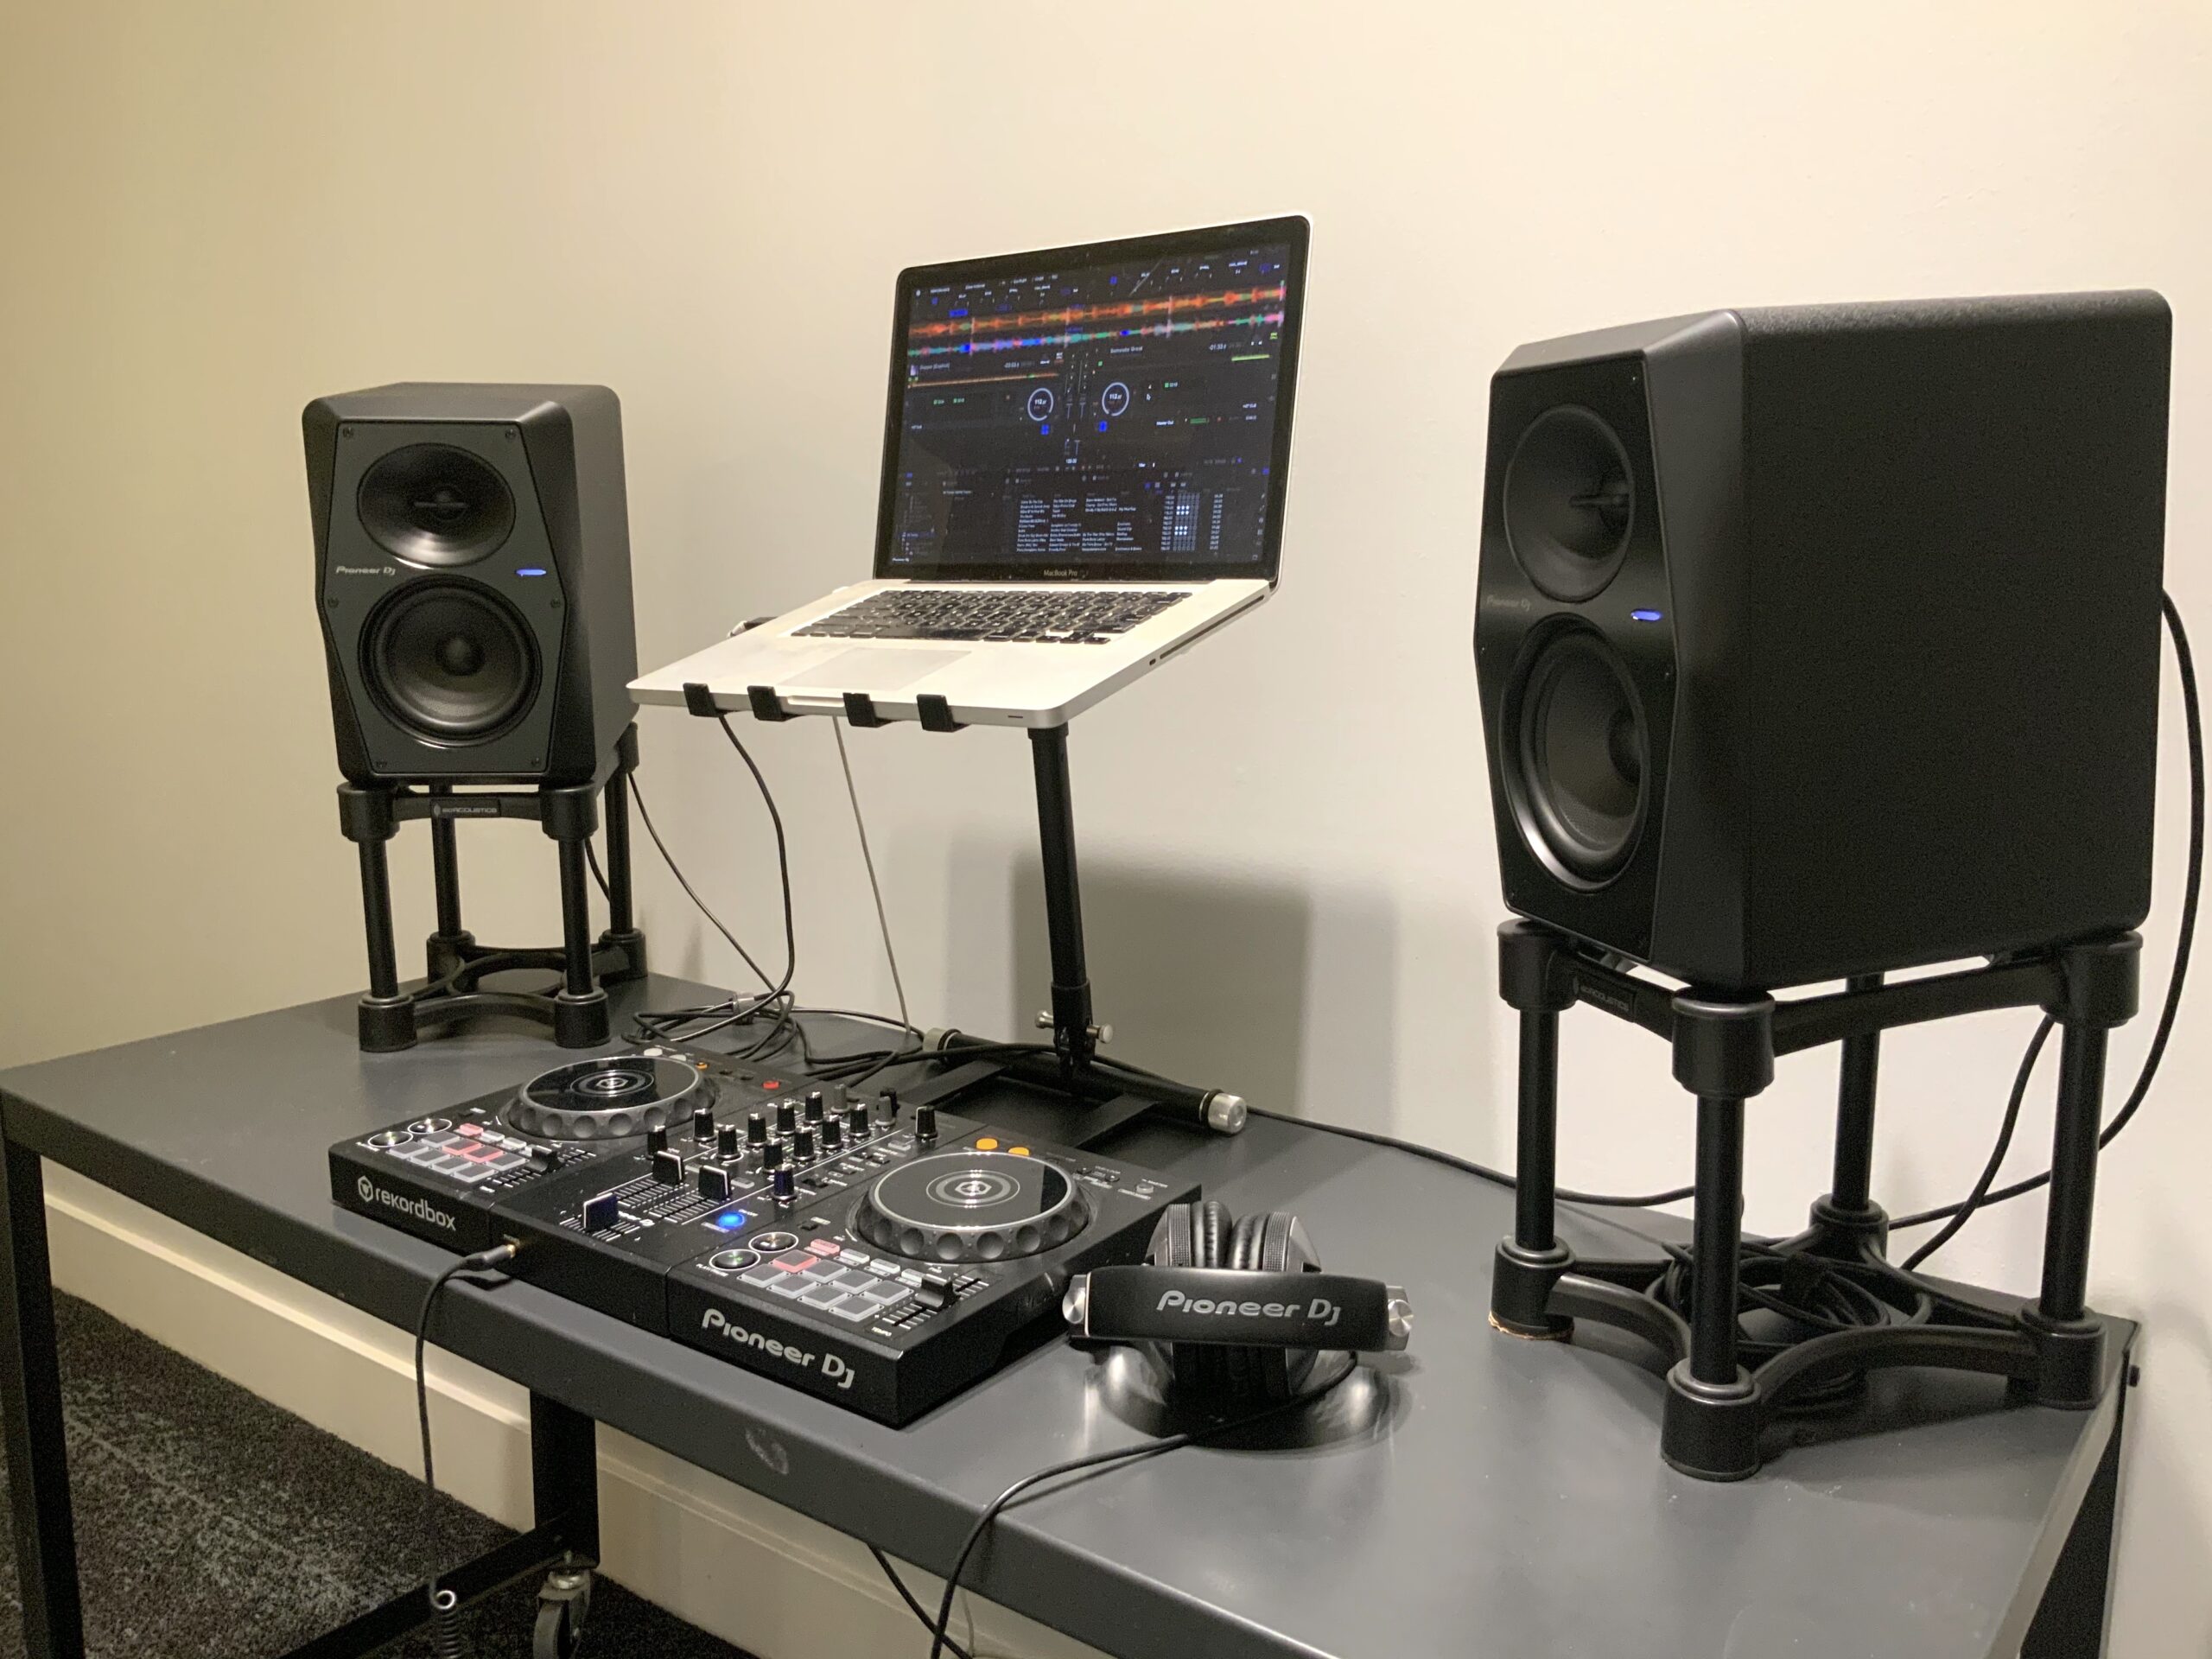 The Pioneer DJ VM-50 studio monitors fit in perfectly with a digital DJ's laptop and controller